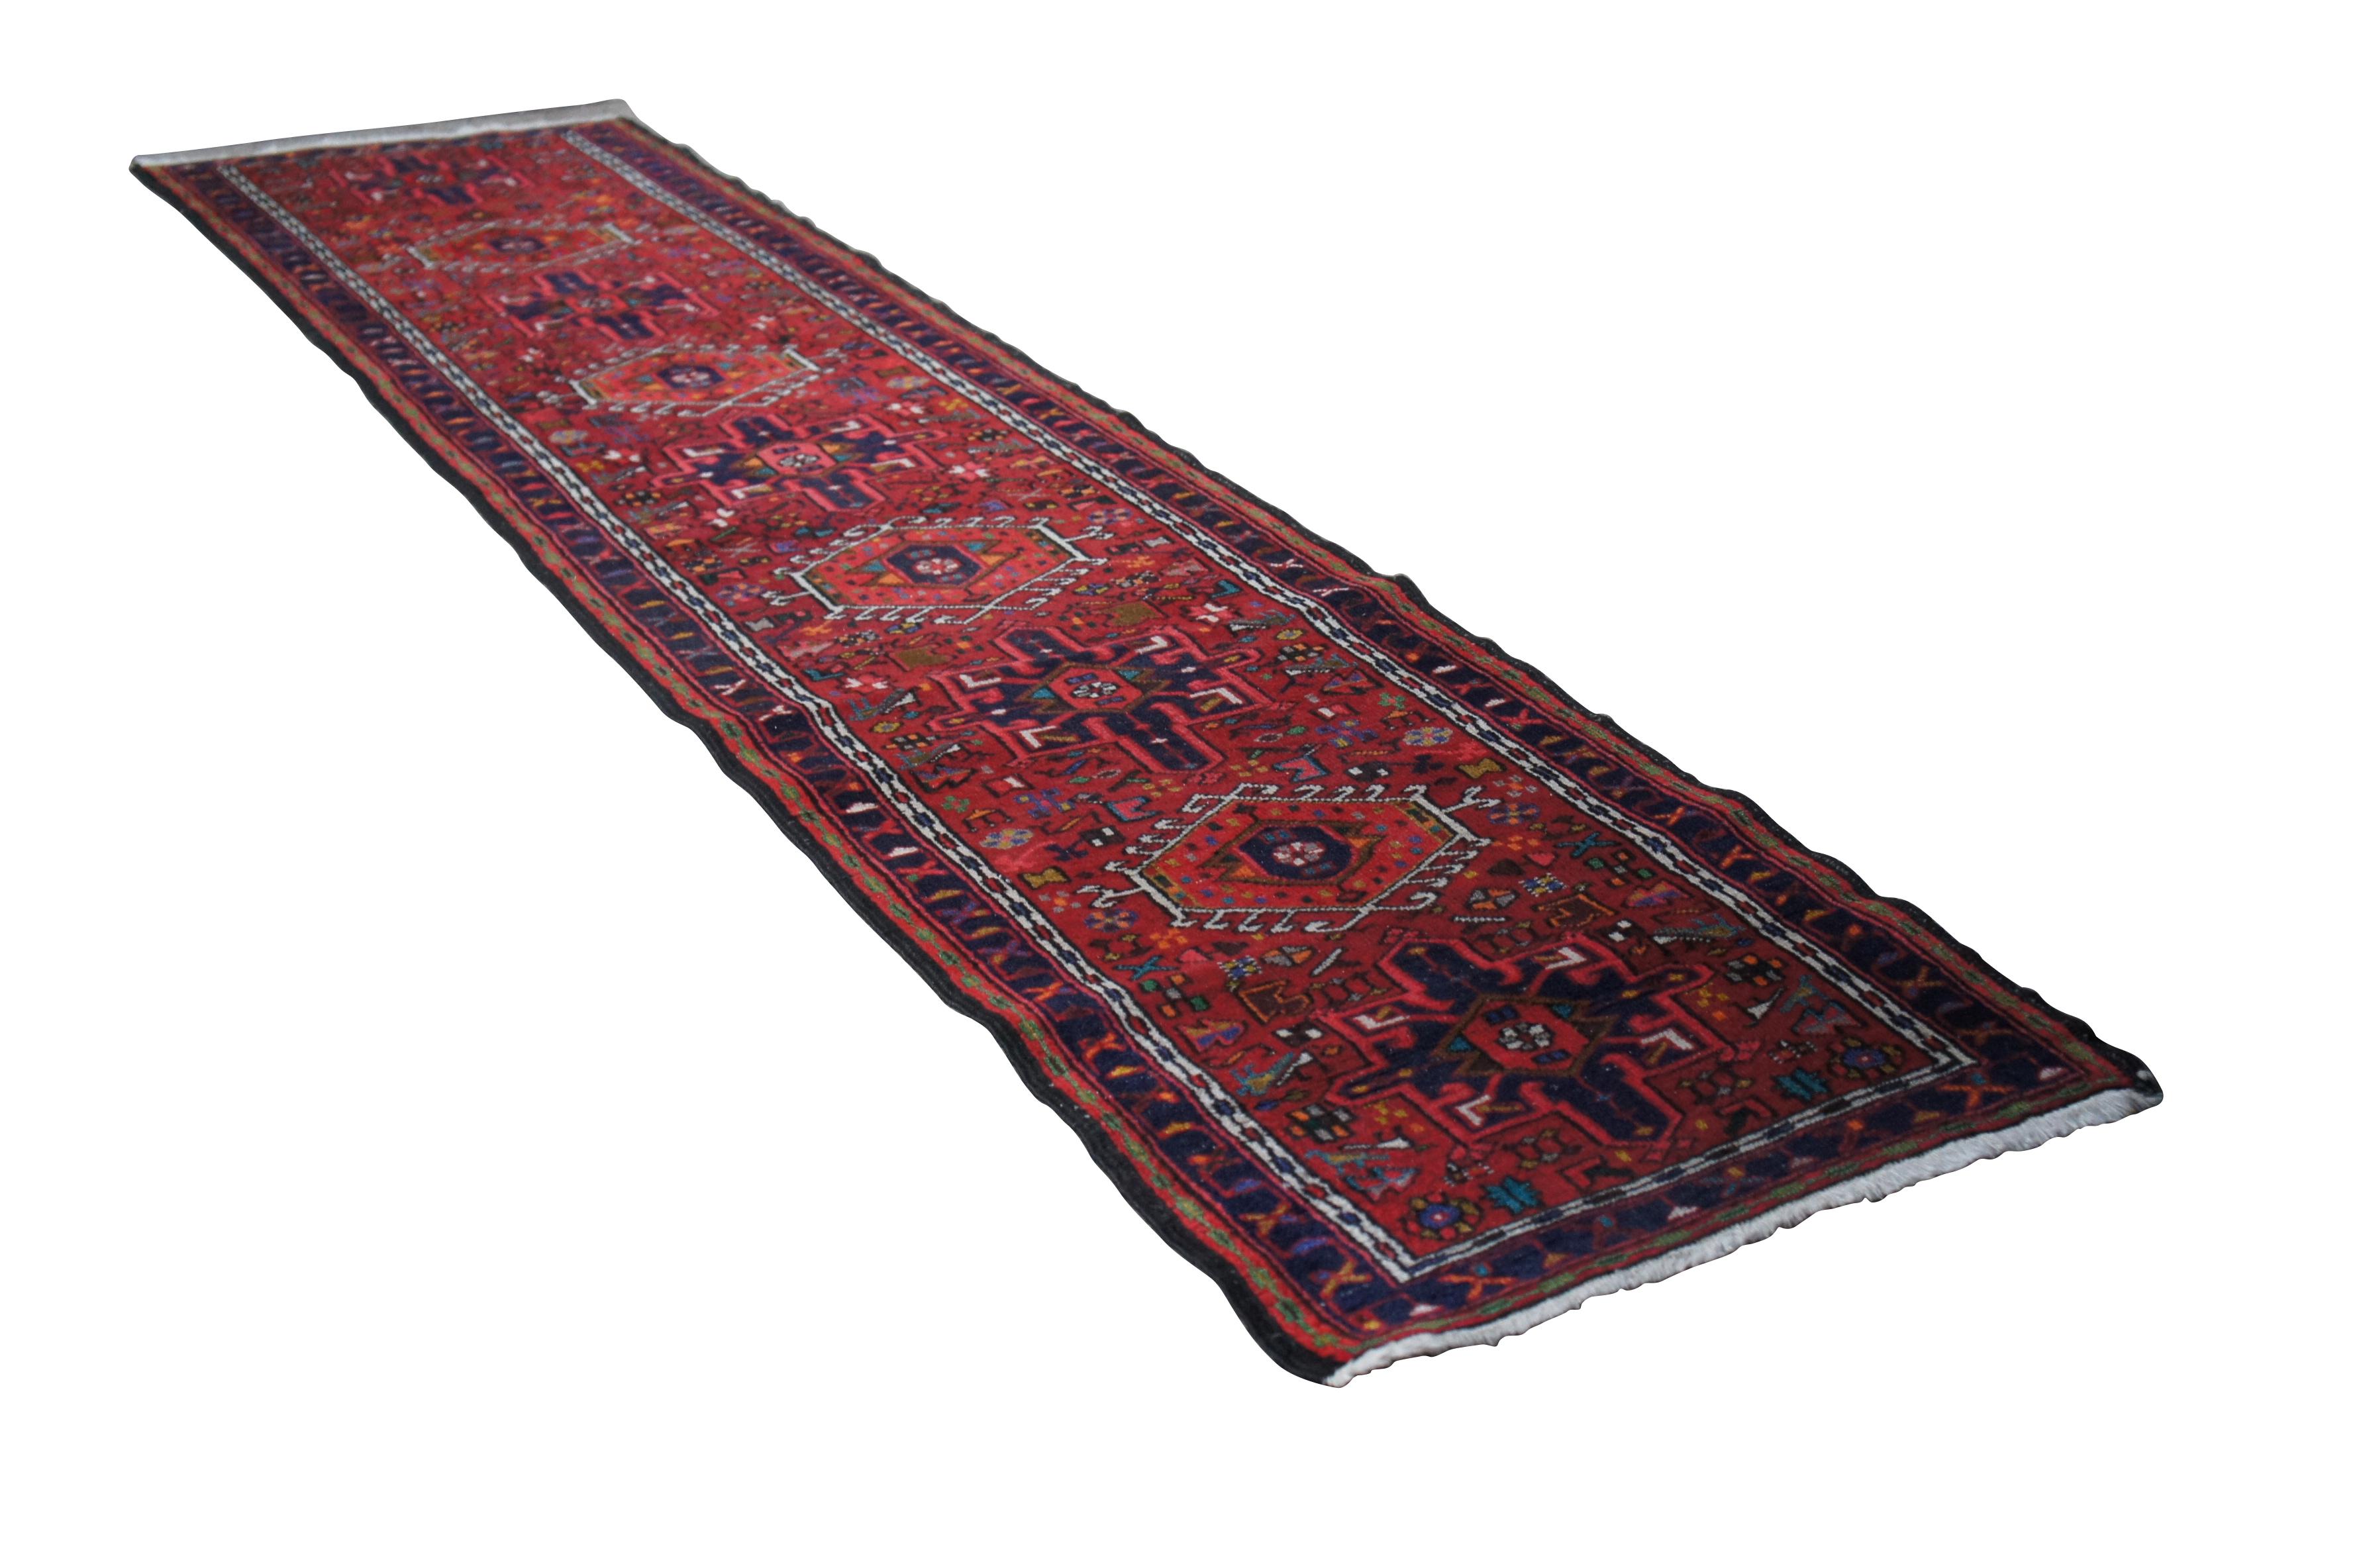 Mid 20th Century NW Persian Heriz Karadja Wool Area Rug Runner Mat 2.9' x 10' In Good Condition For Sale In Dayton, OH